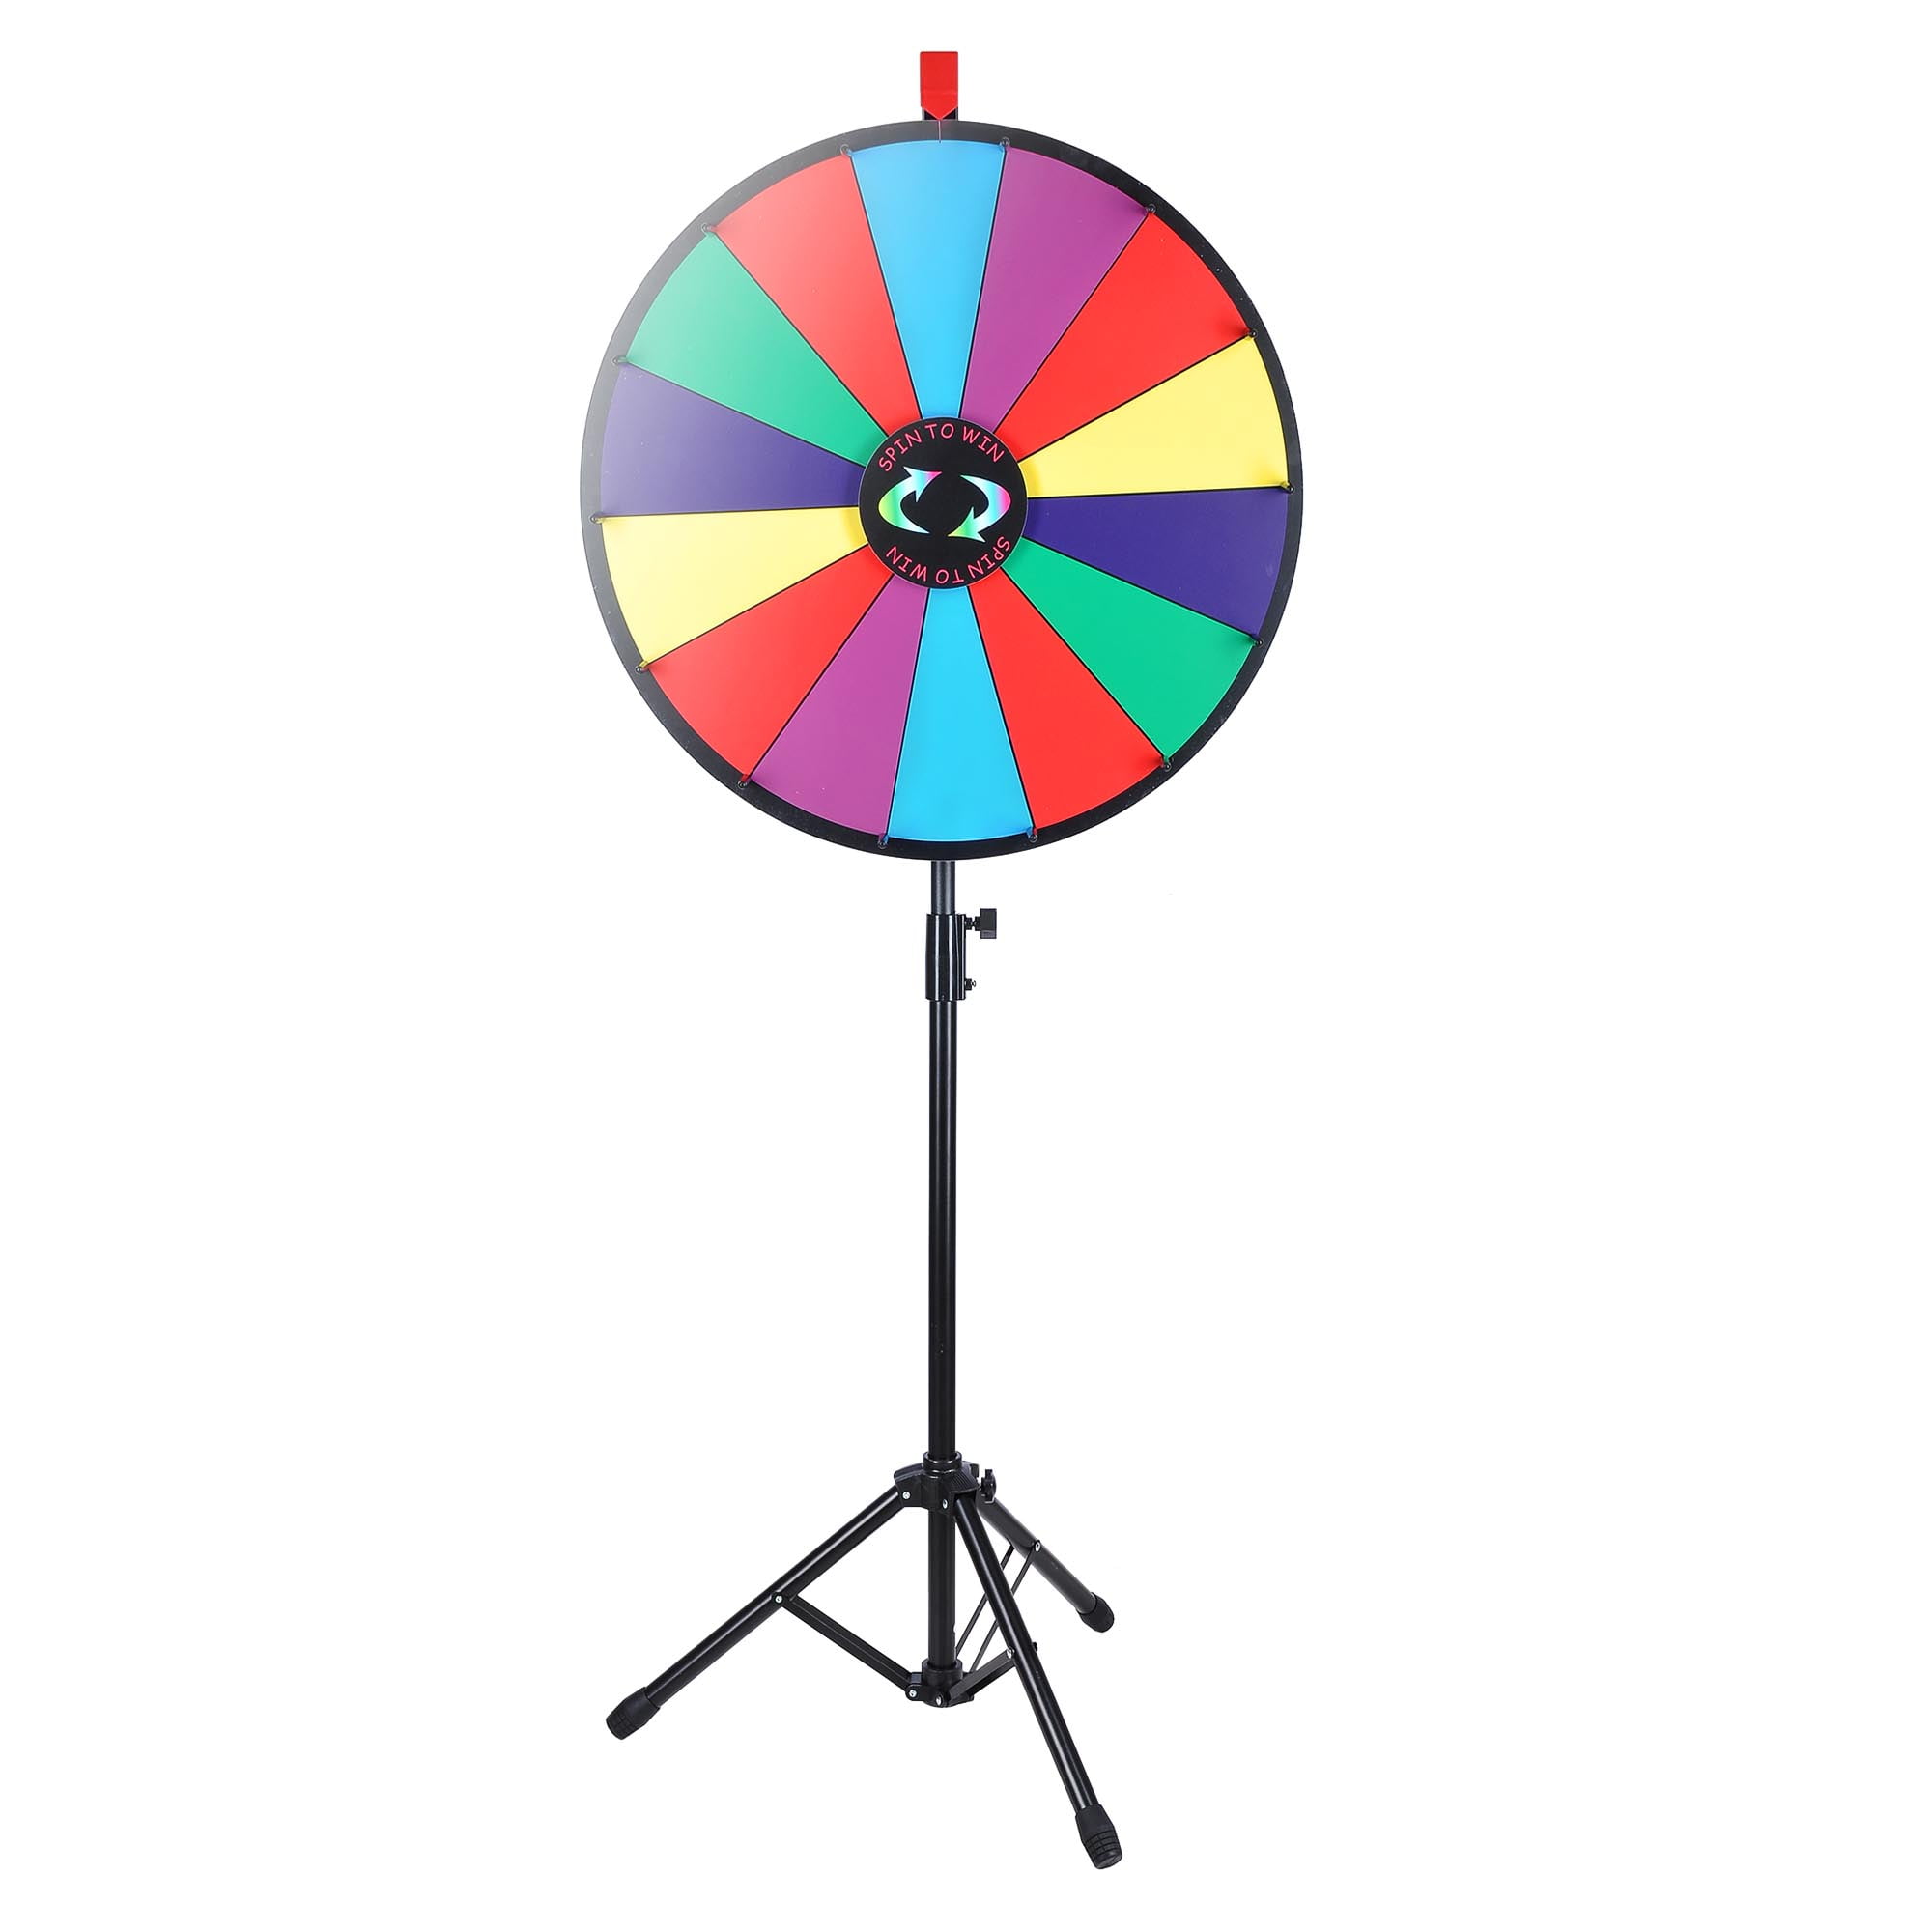 Koval Inc Tripod Adjustable Stand with Spinning Prize Wheel 24 14 Slots with Color Dry Erase Carnival Games Trade Show Fortune Spin Game Office Party